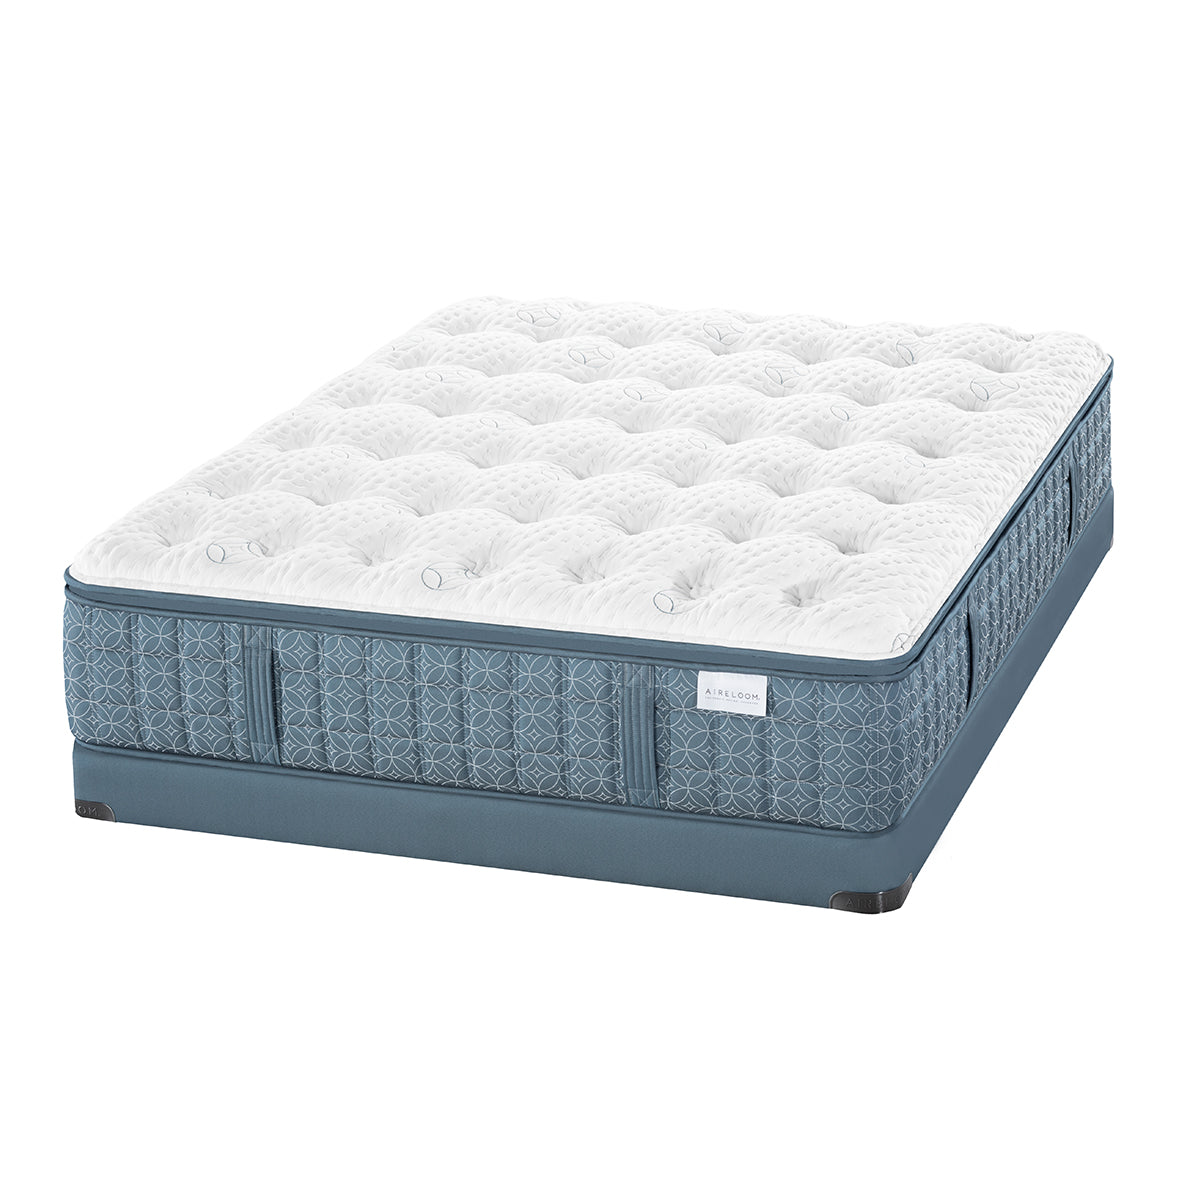 Aireloom Opus Luxury Firm Mattress On A Low Profile 5" Box Spring